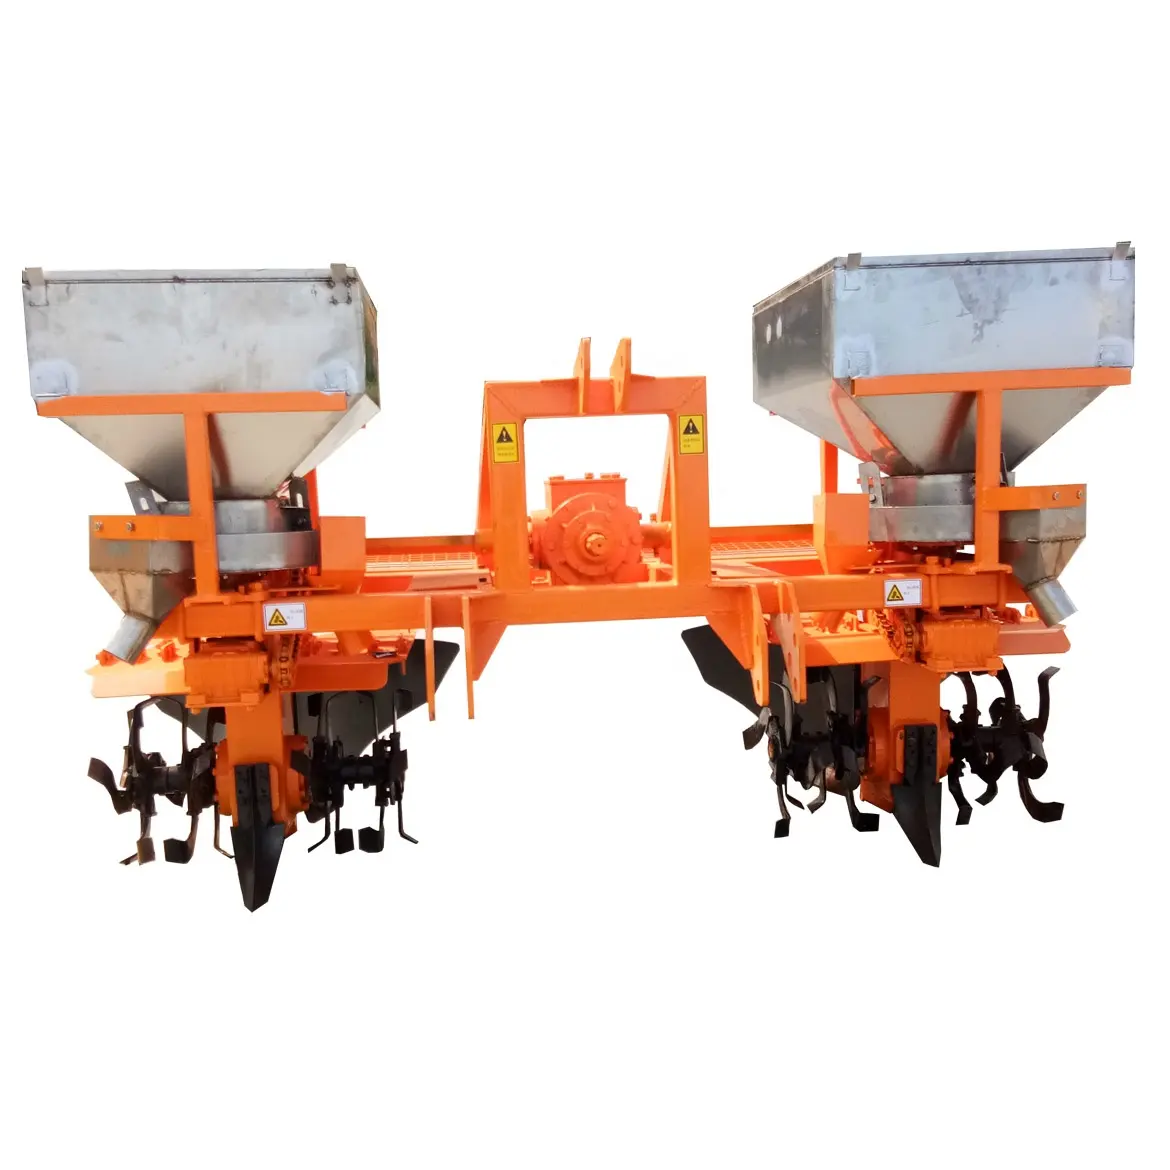 Hot selling tractor sugarcane rotary tiller / cultivator / agricultural machinery and equipment Machine